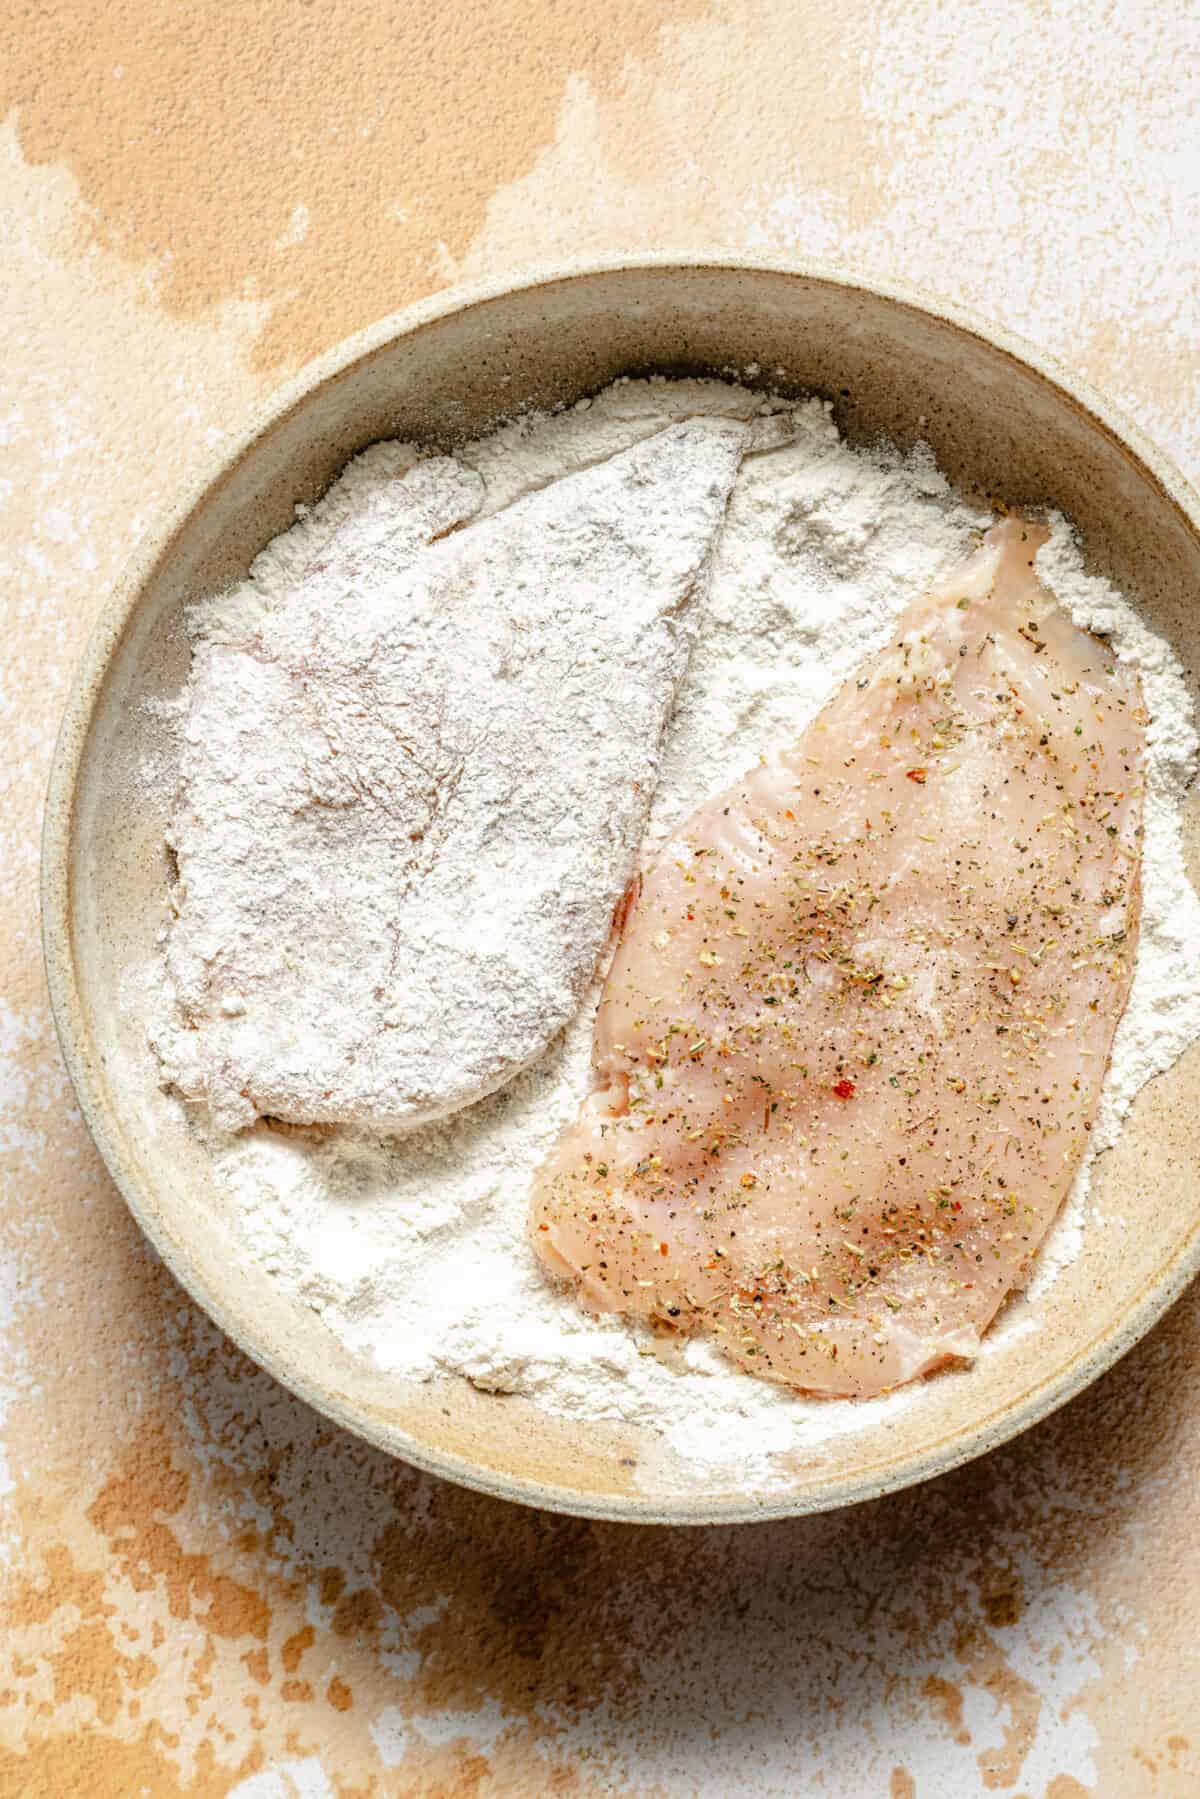 Raw chicken breasts in low bowl filled with flour.